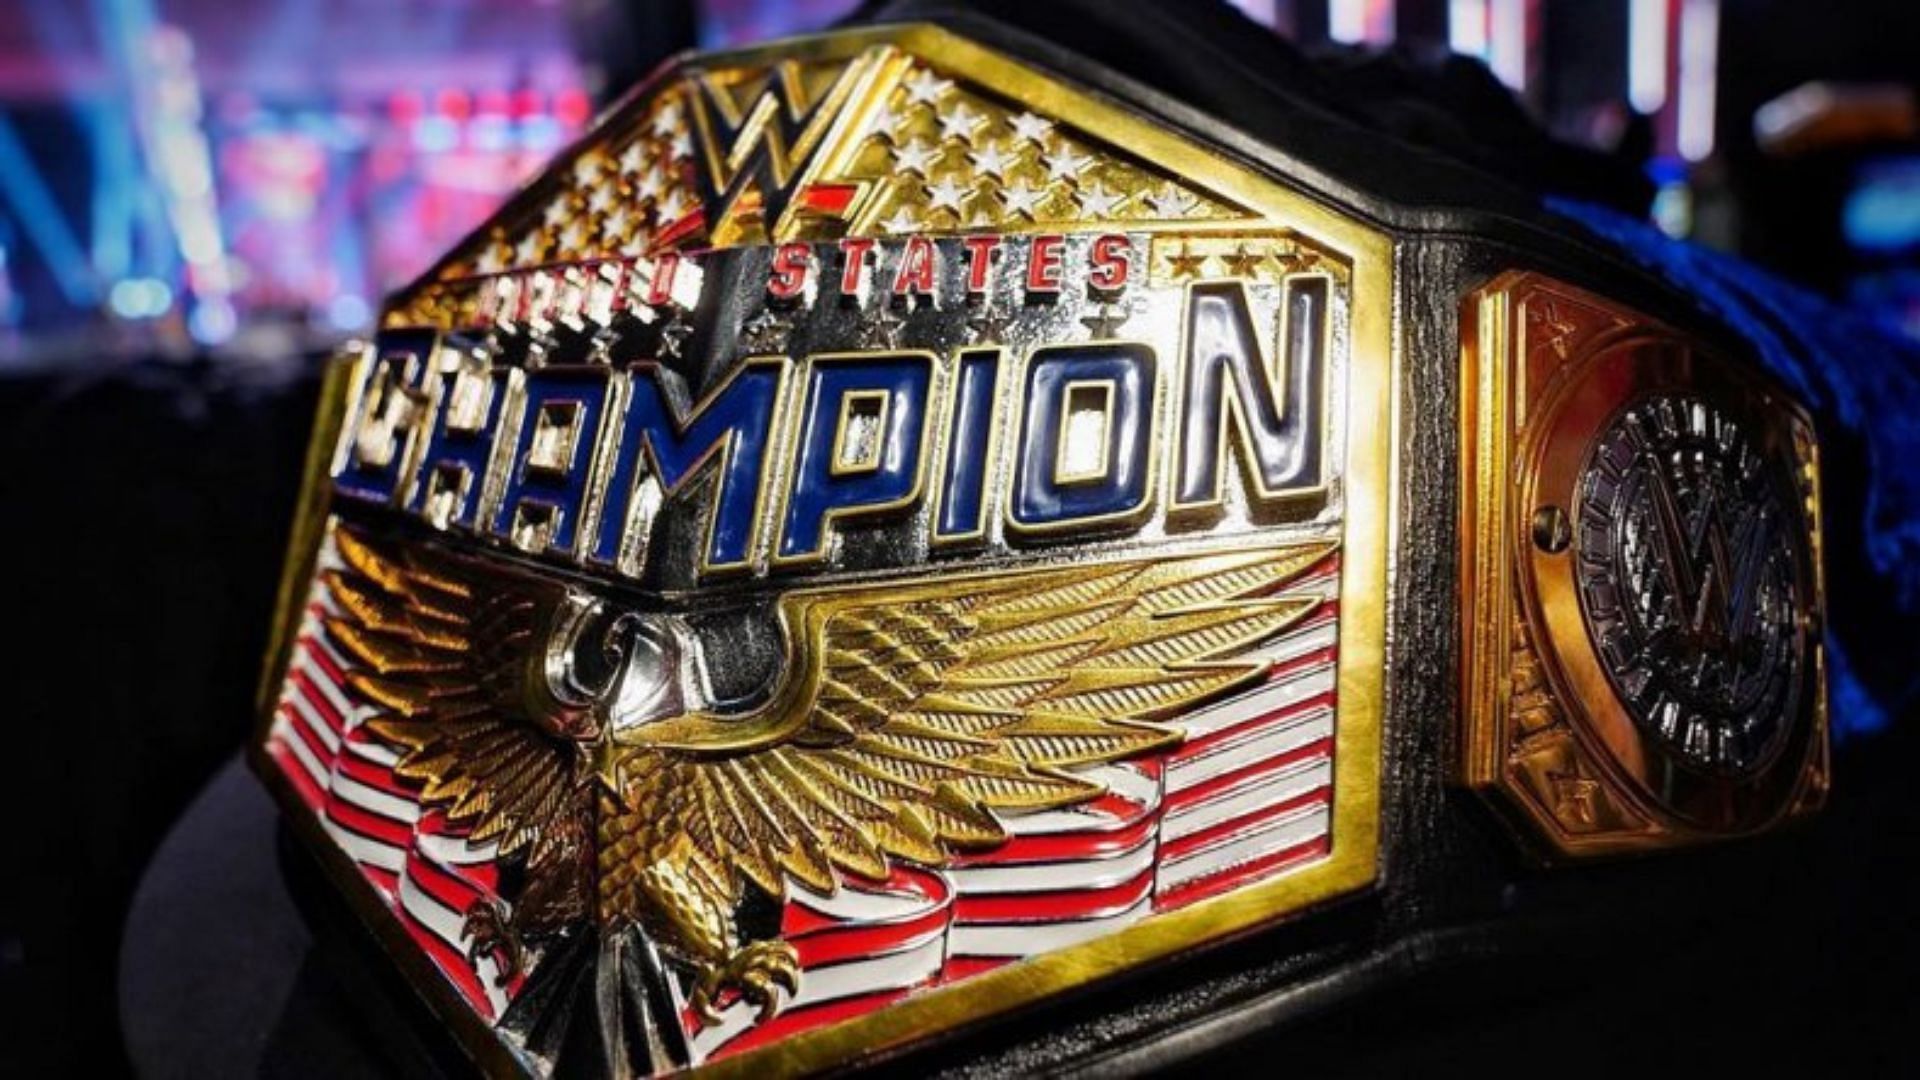 A former United States Champion is proud to have held the title.